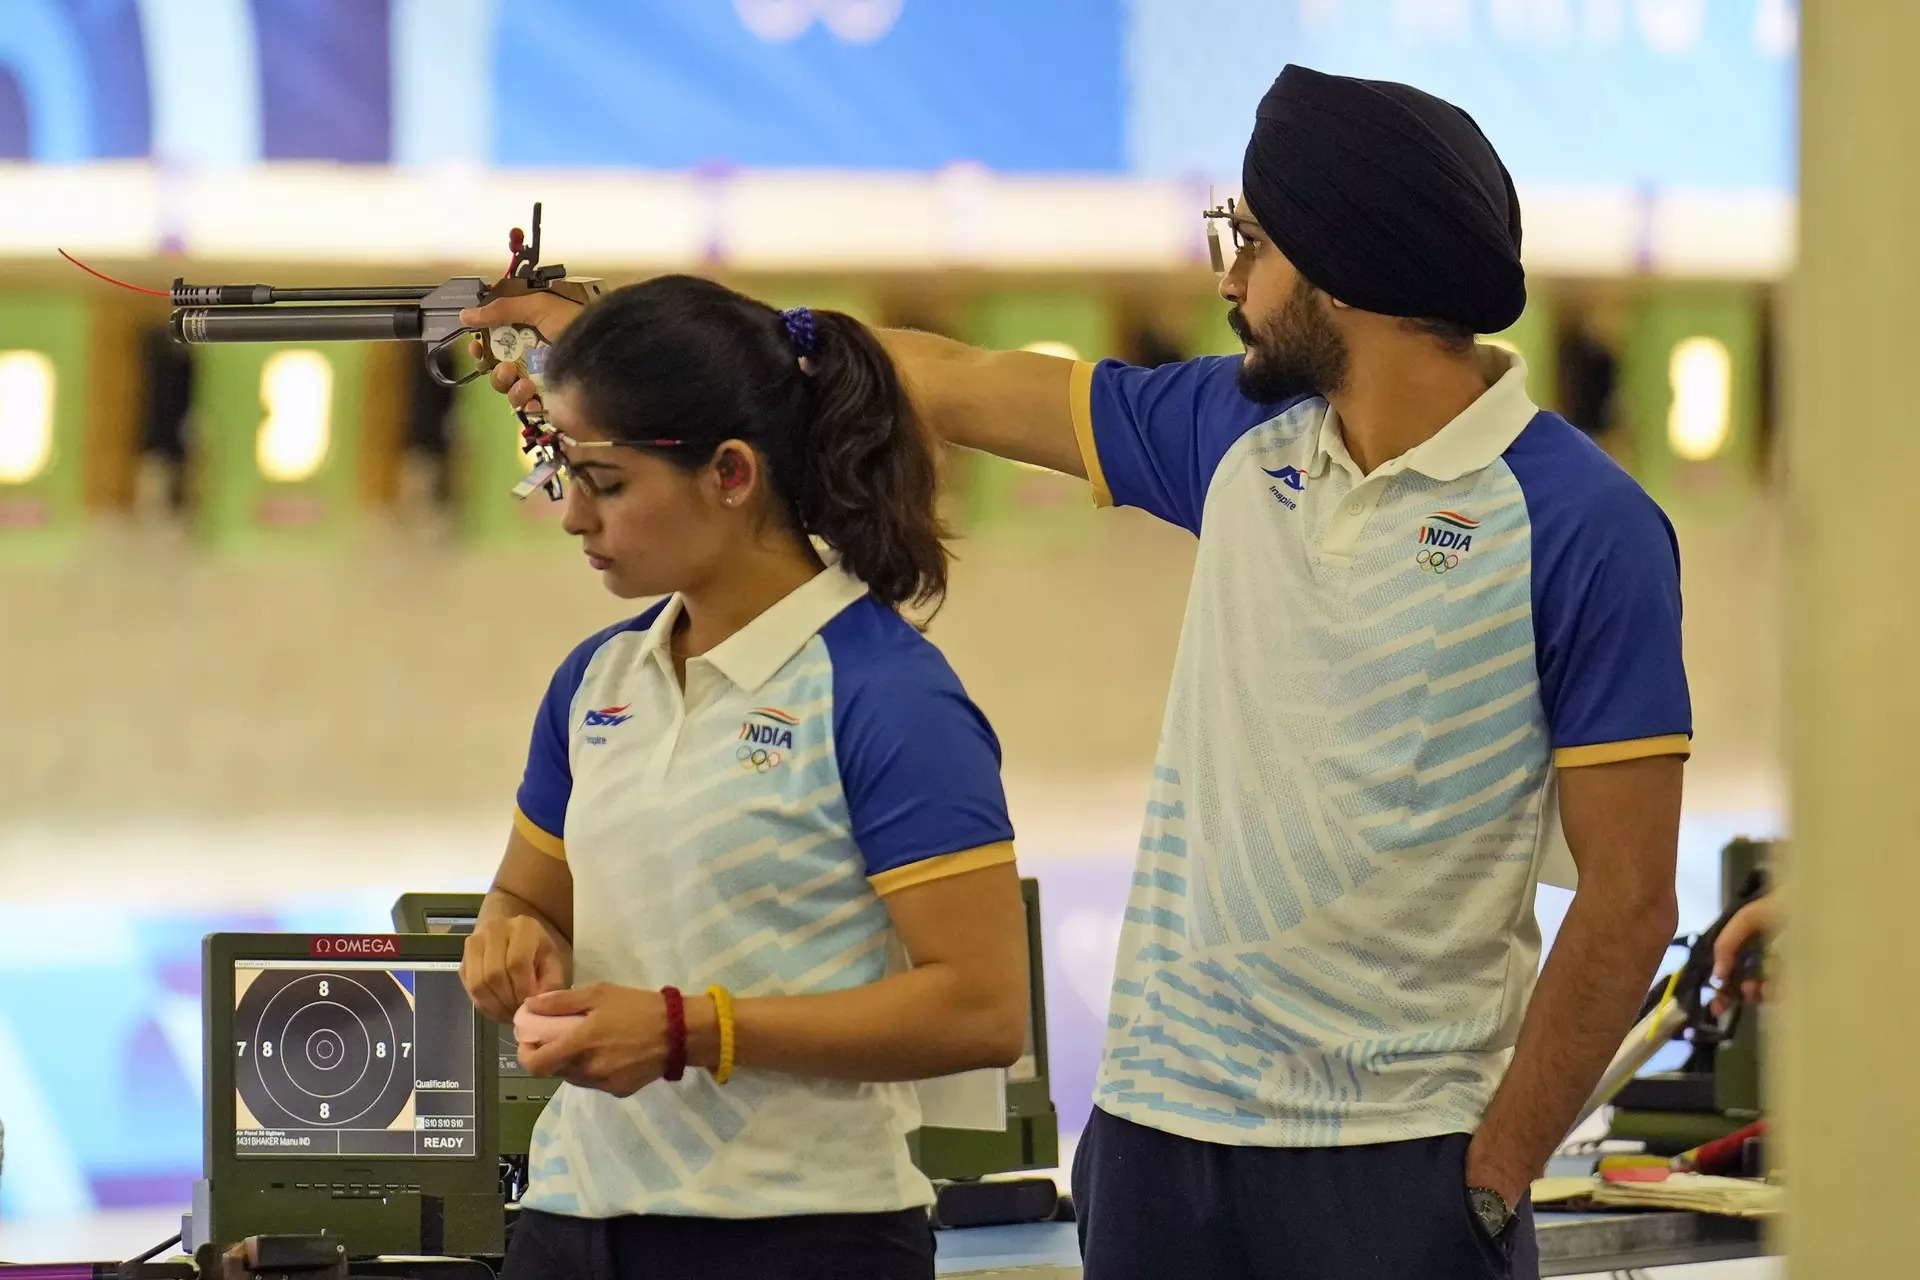 Paris Olympics: Manu Bhaker and Sarabjot Singh give hope of another medal after qualifying in 10 m air pistol final 